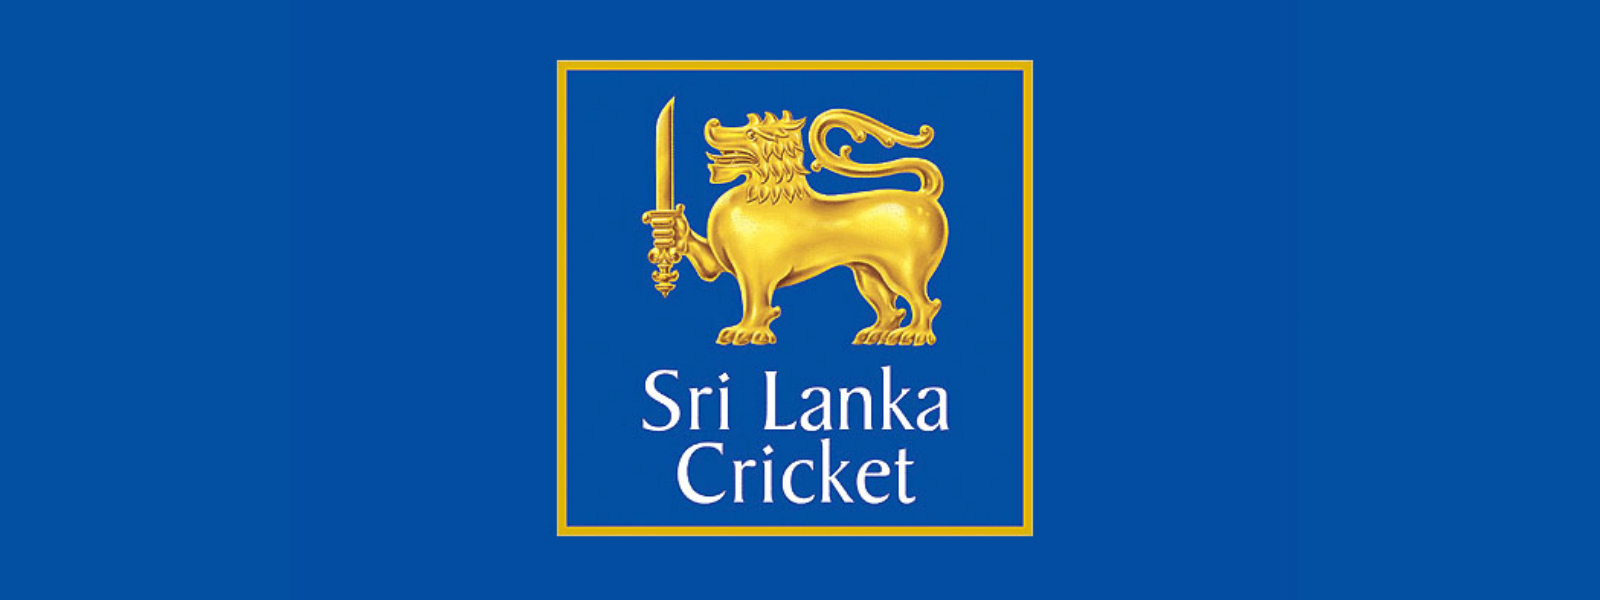 Rs. 7.5 Million monthly salary for Hathurusinghe